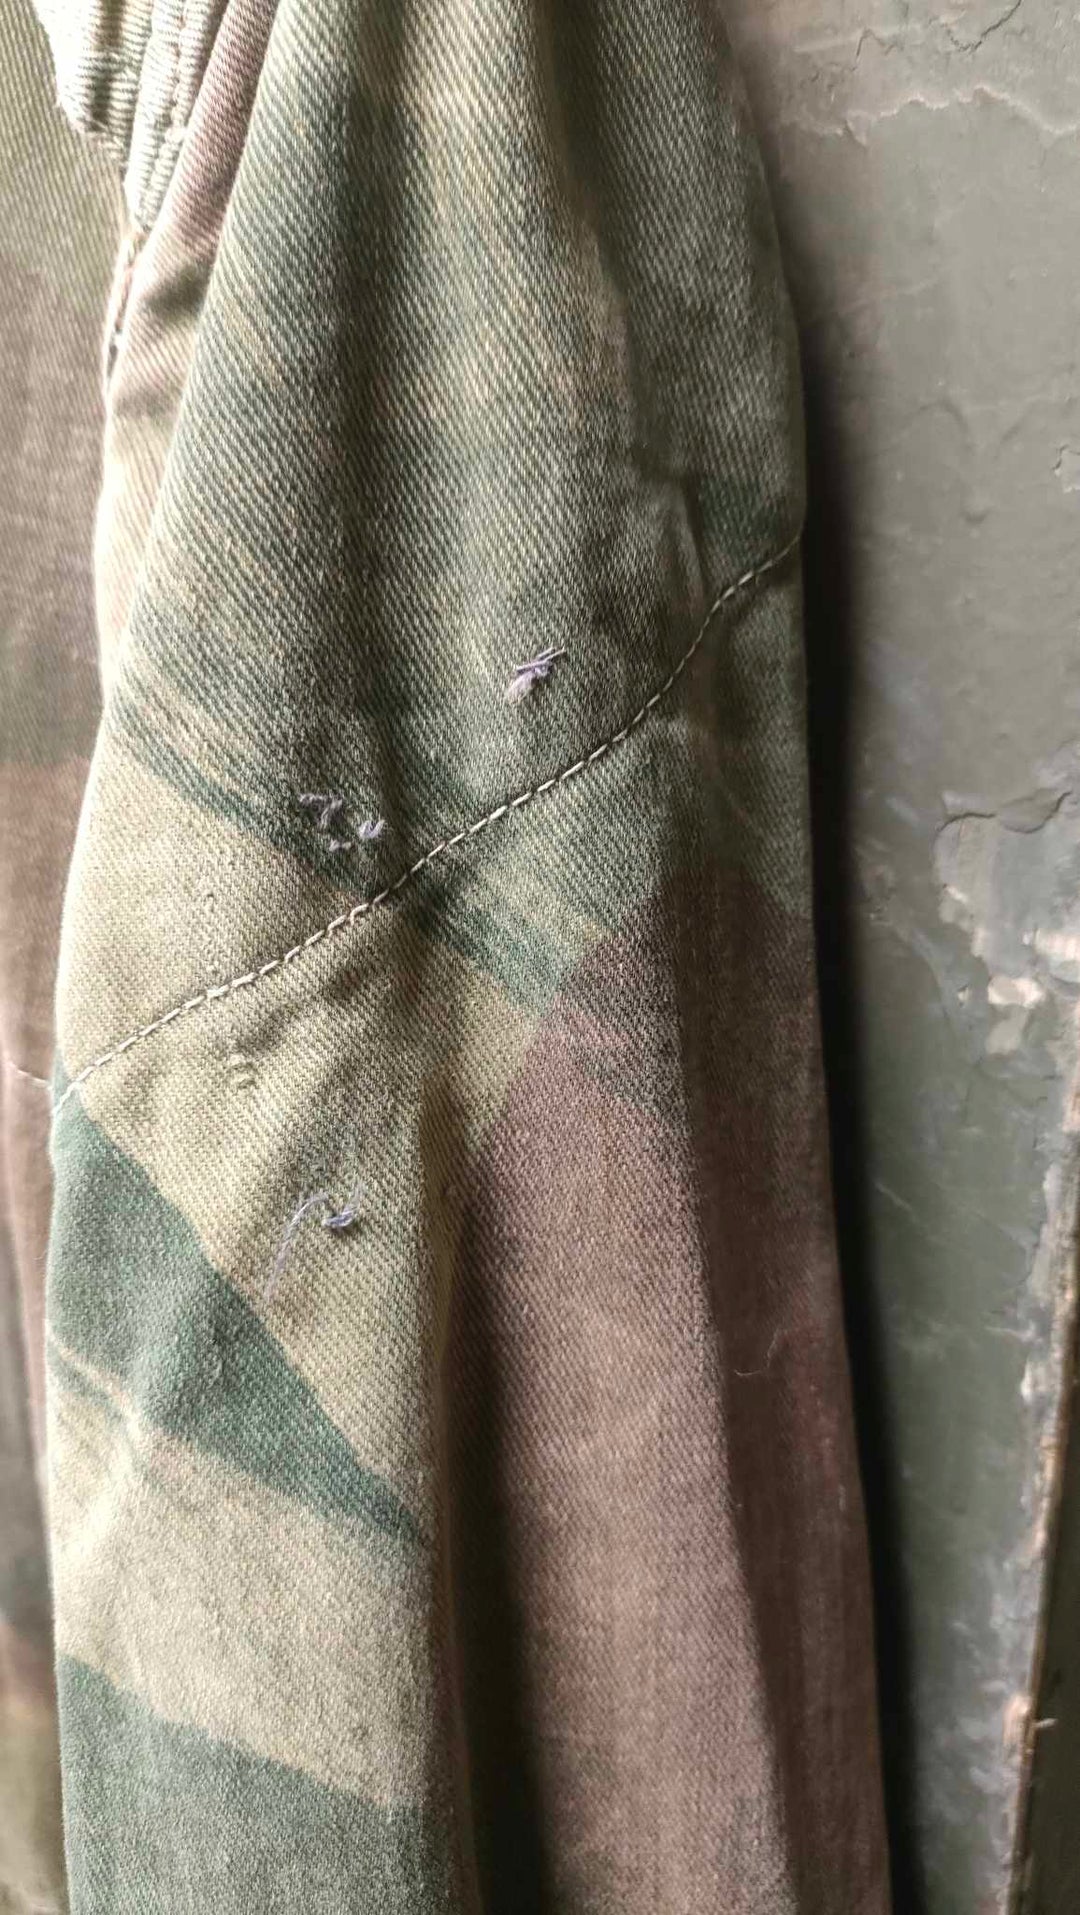 close up of small pulls in sleeve